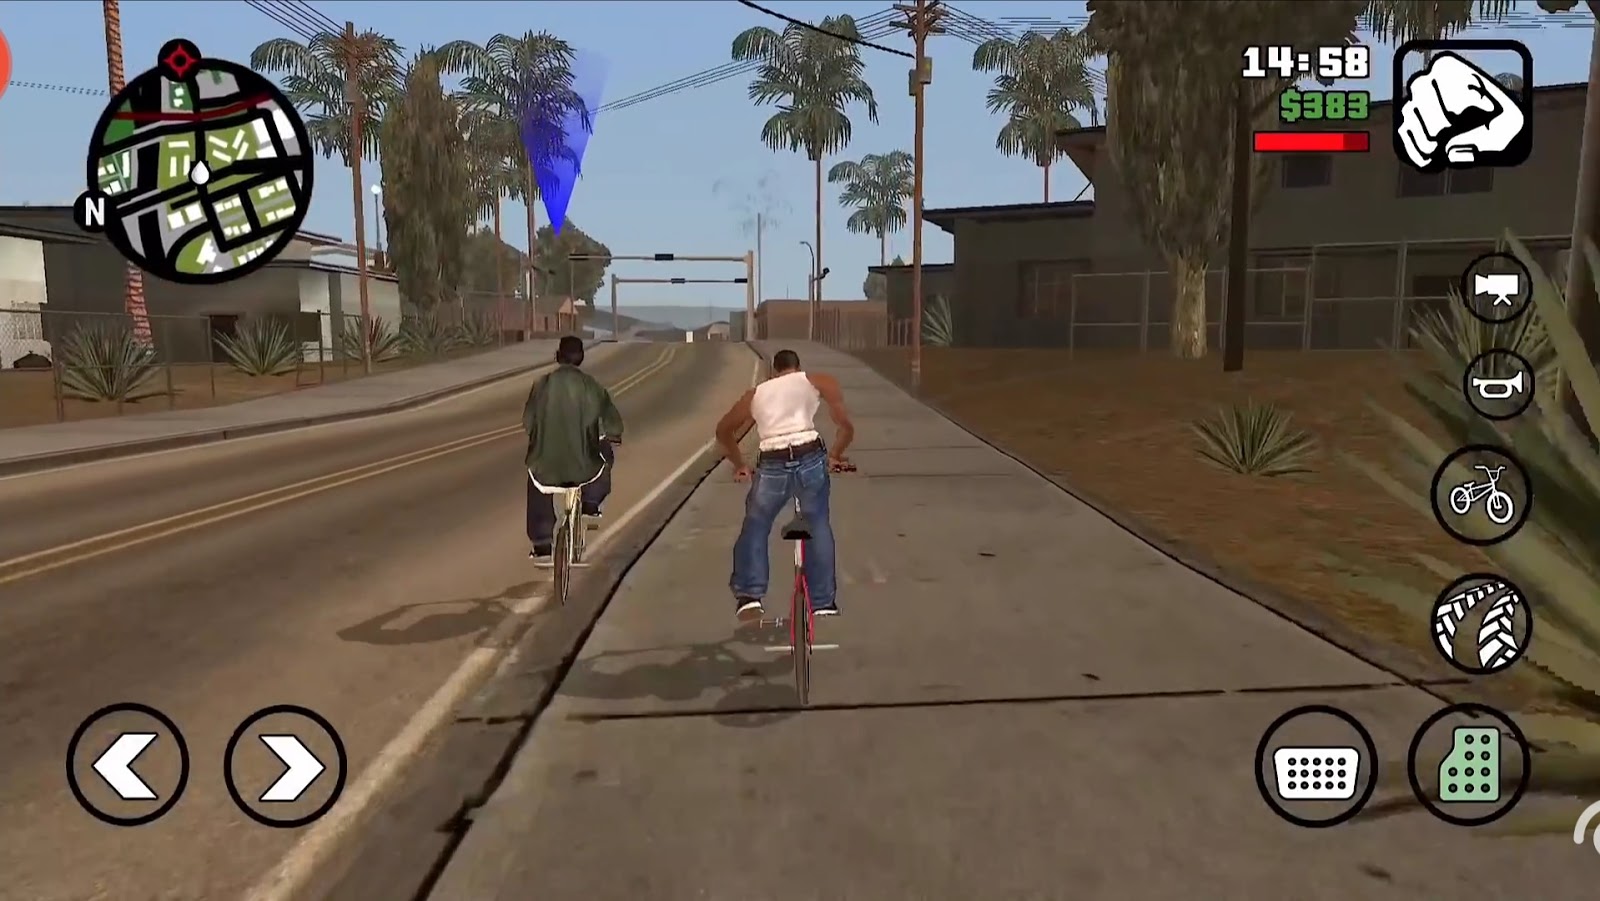 Download Gta San Andreas New Latest Version 2 00 Full Game